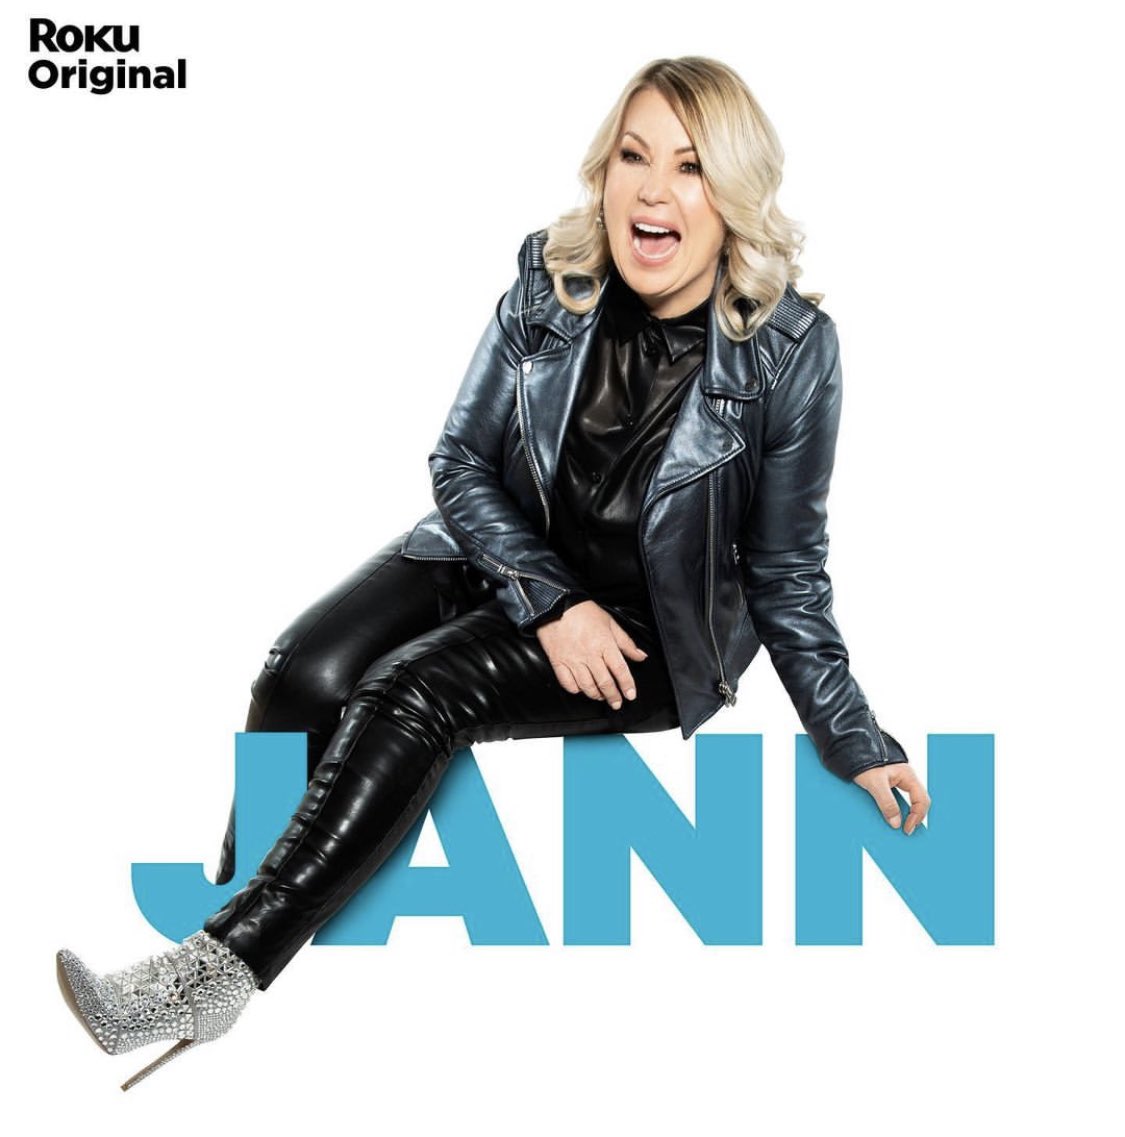 Friends and JANN-fans in the U.S., good news! JANN premieres on @Roku today — all 3 seasons of JANN are now available! @jannarden @janncreators